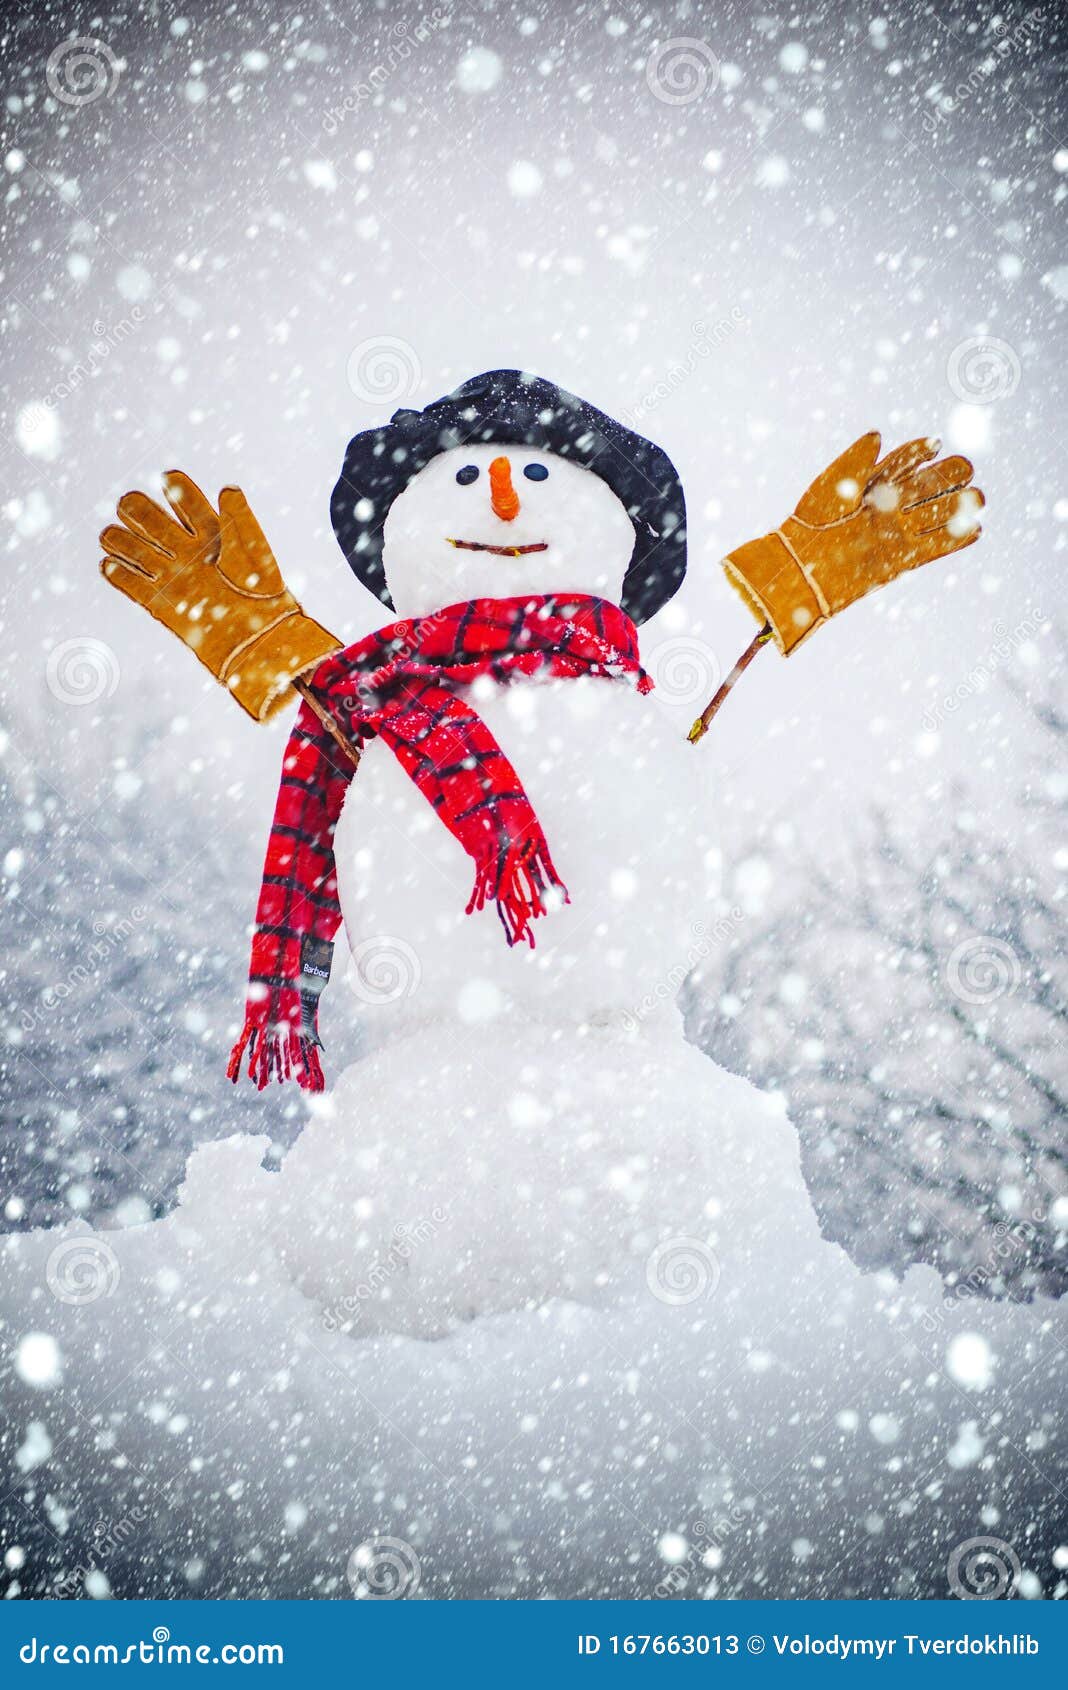 Snow Man in Winter Hat. Christmas Background with Snowman. Funny ...